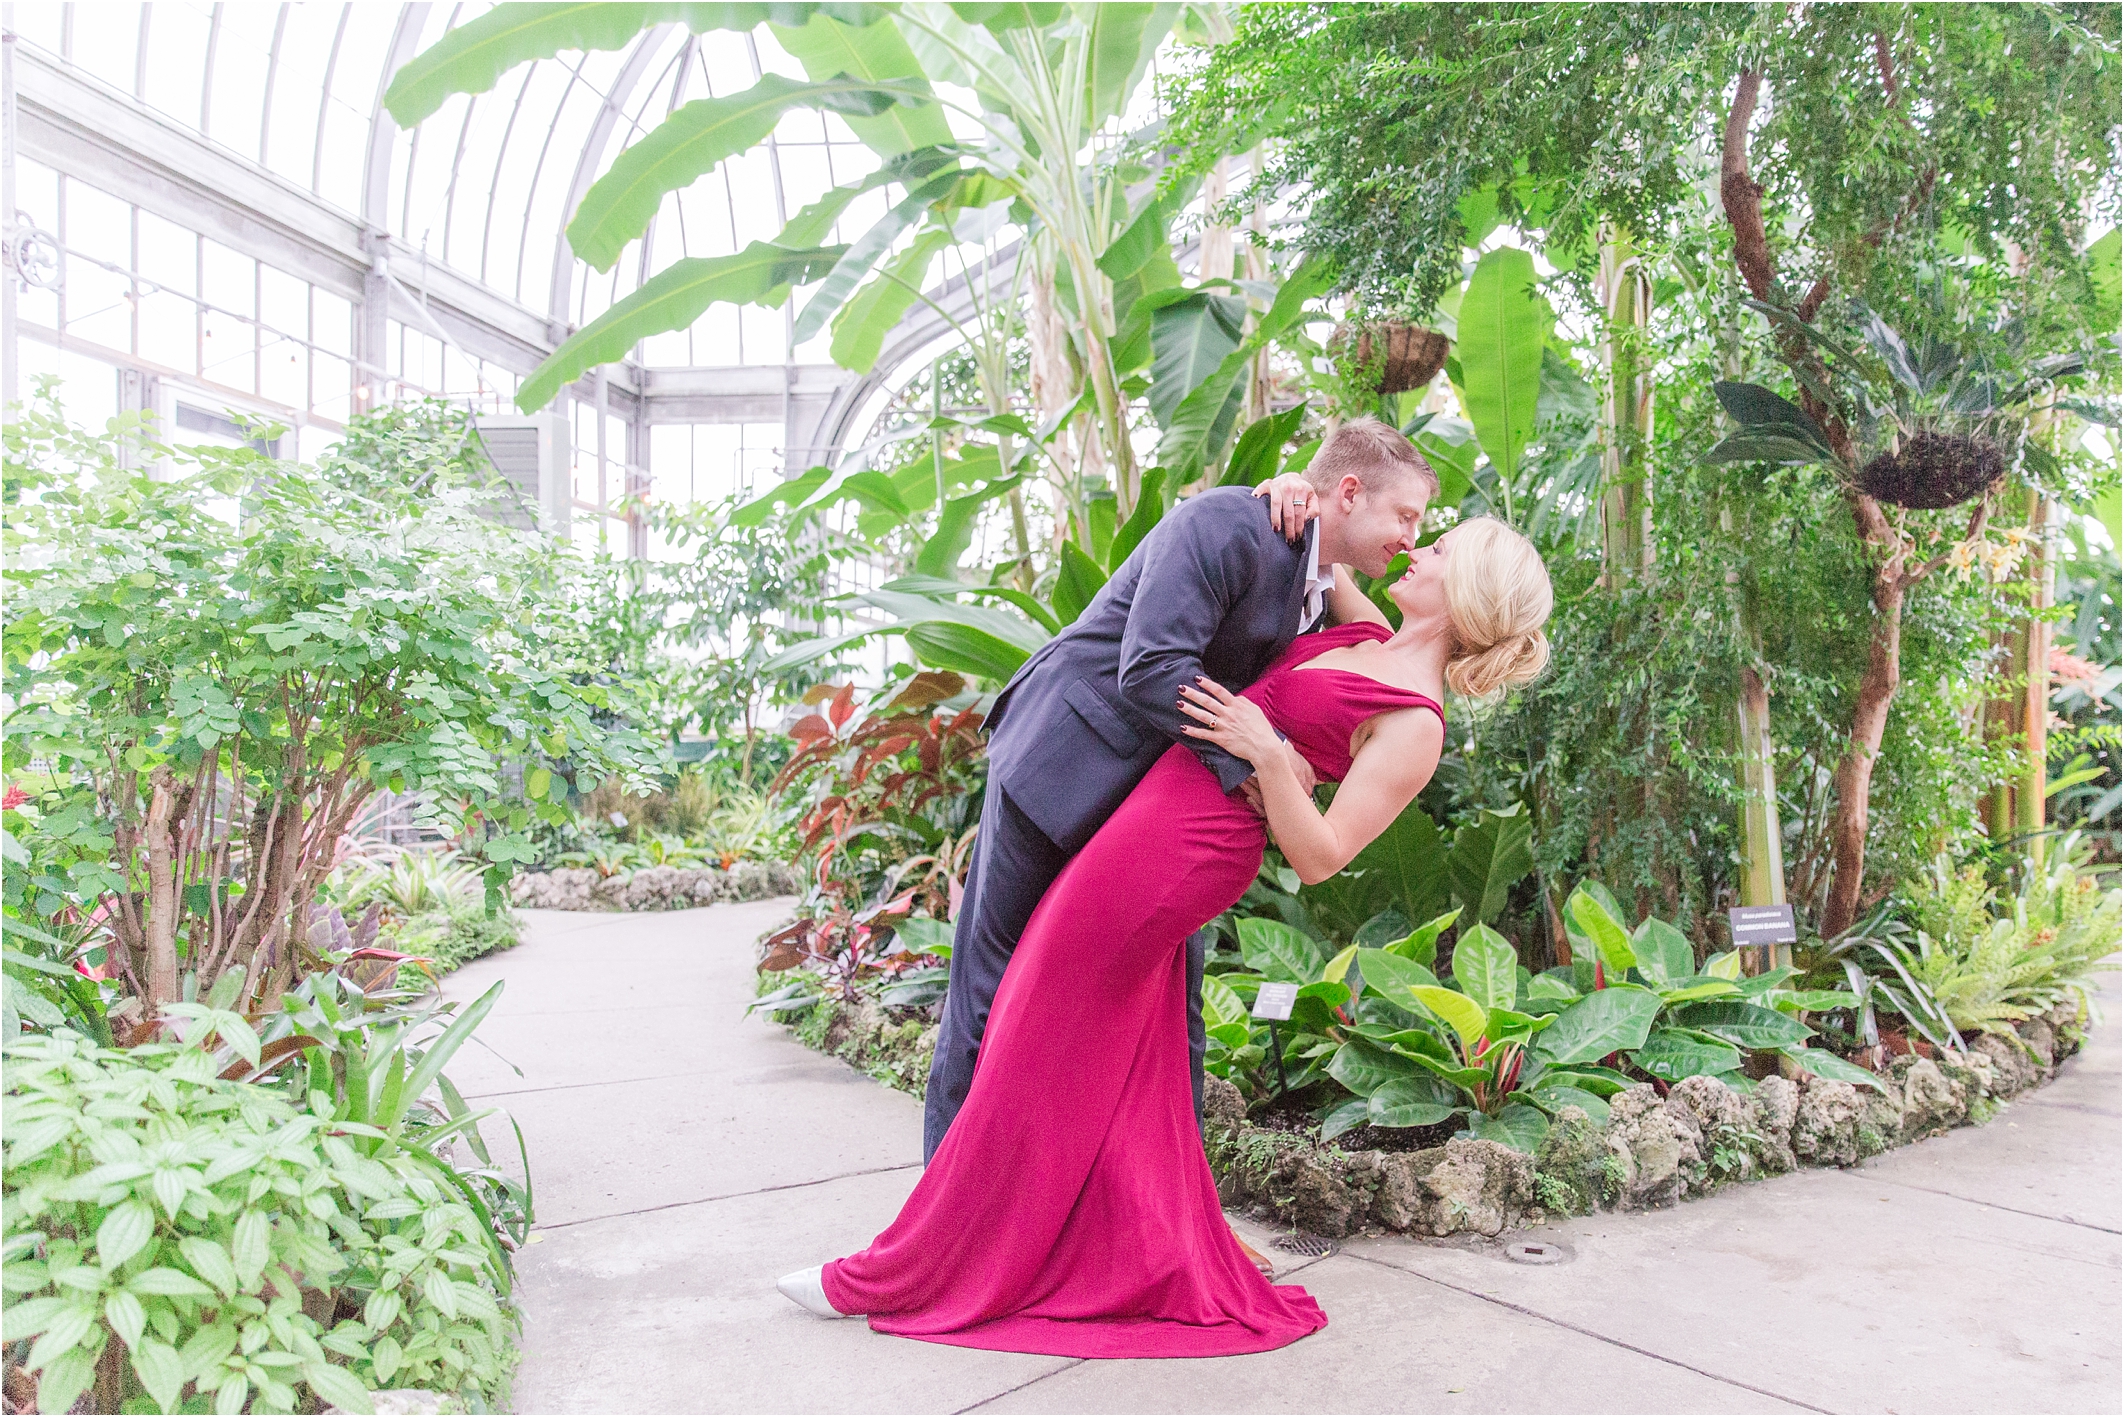 elegant-classic-belle-isle-conservatory-engagement-photos-in-detroit-mi-by-courtney-carolyn-photography_0020.jpg